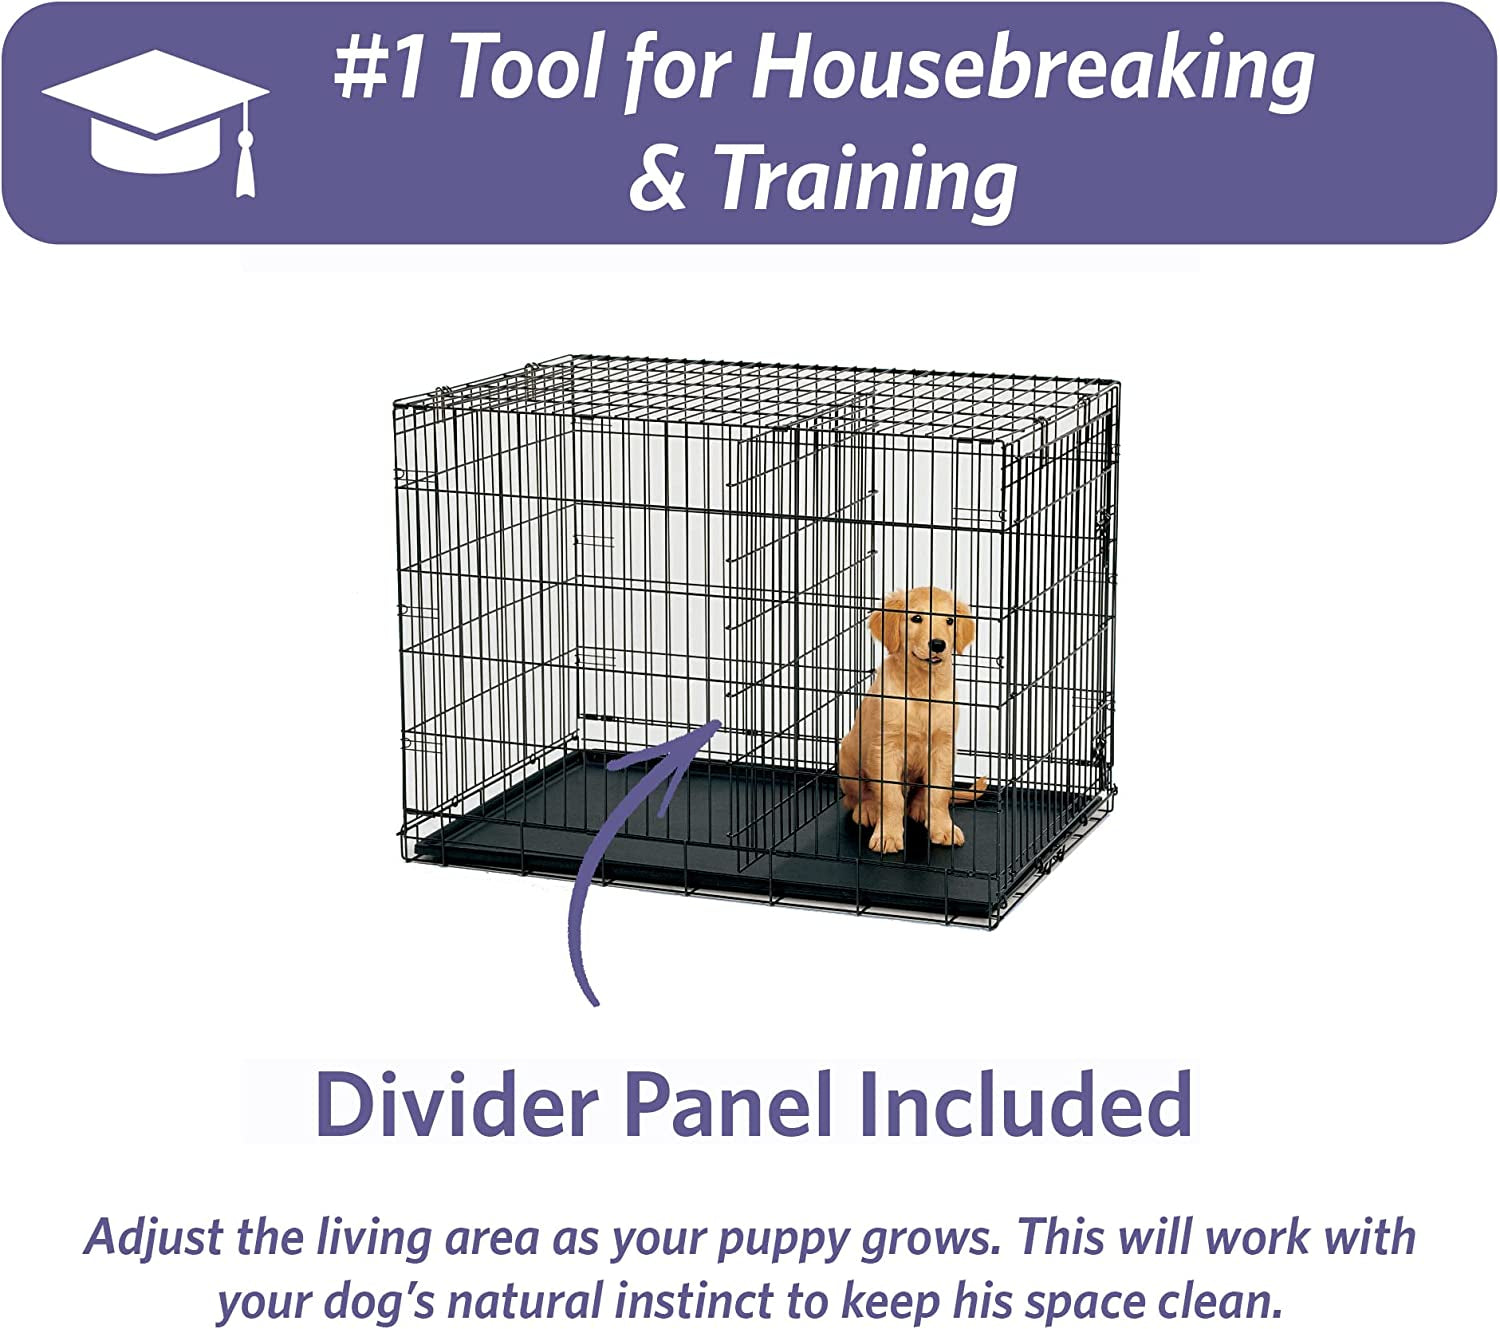 Newly Enhanced Single Door Icrate Dog Crate, Includes Leak-Proof Pan, Floor Protecting Feet, Divider Panel & New Patented Features